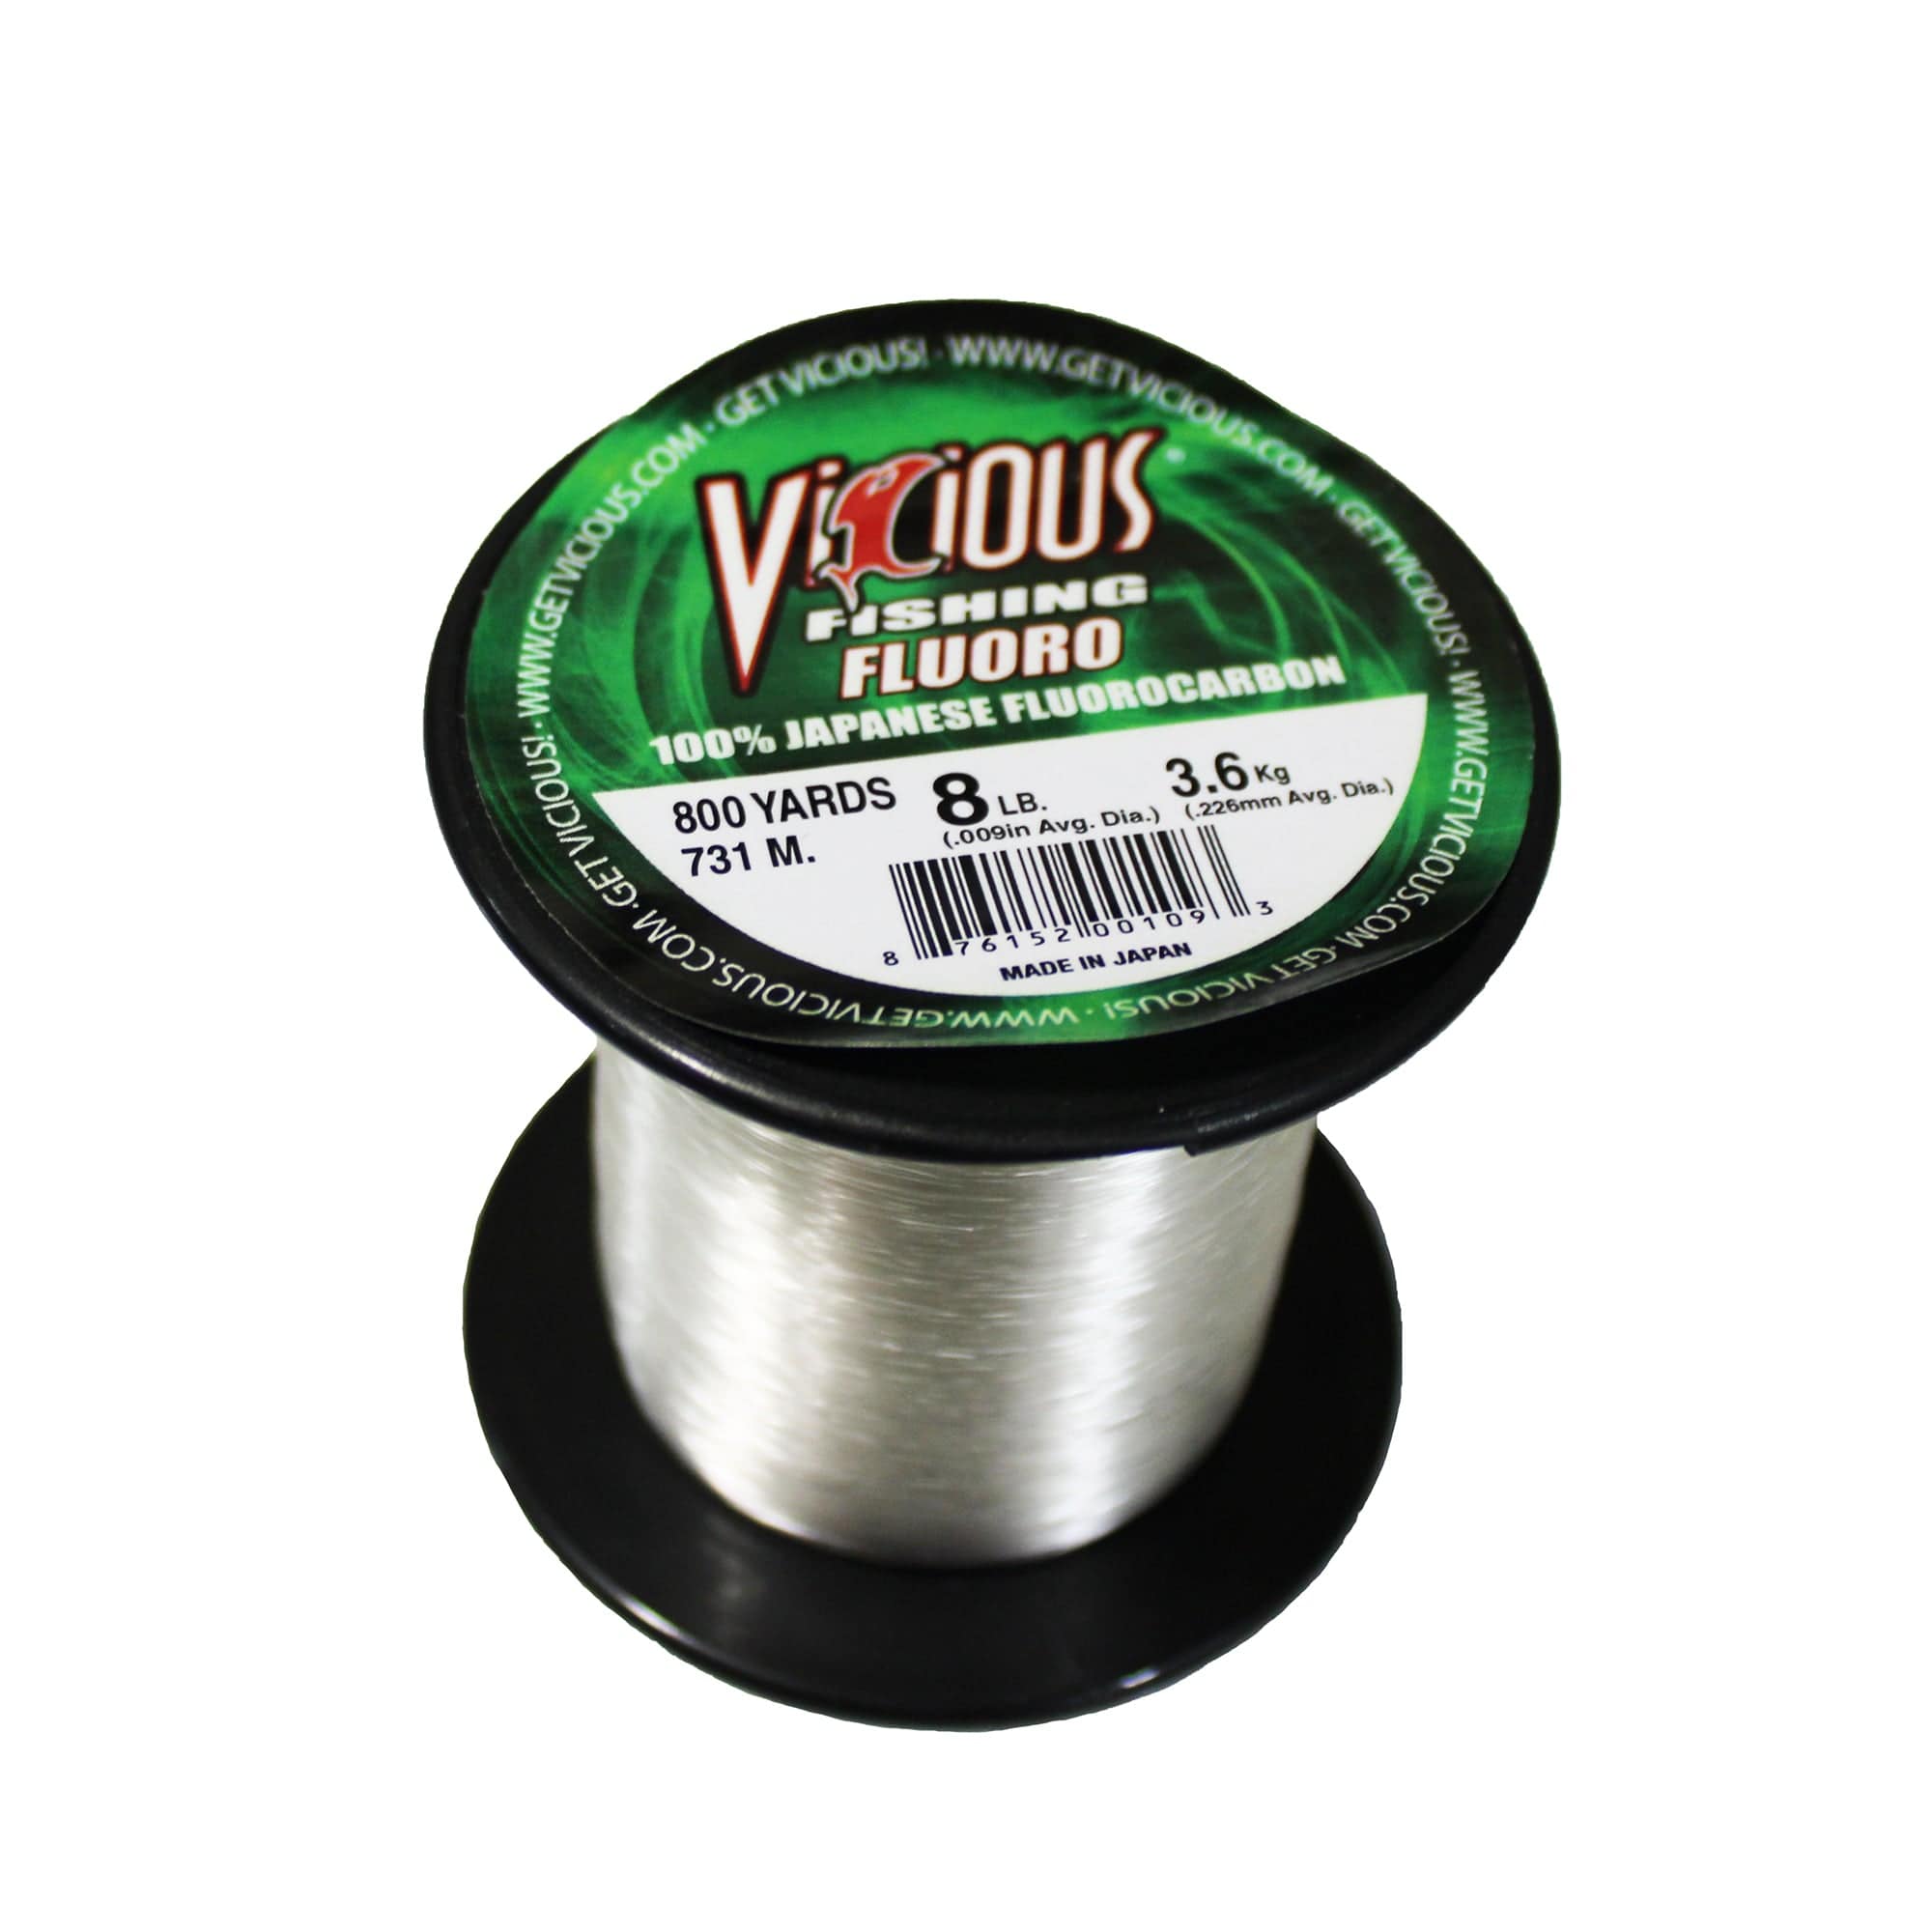 Vicious Fishing Fluorocarbon Fishing Line – 250yds Clear